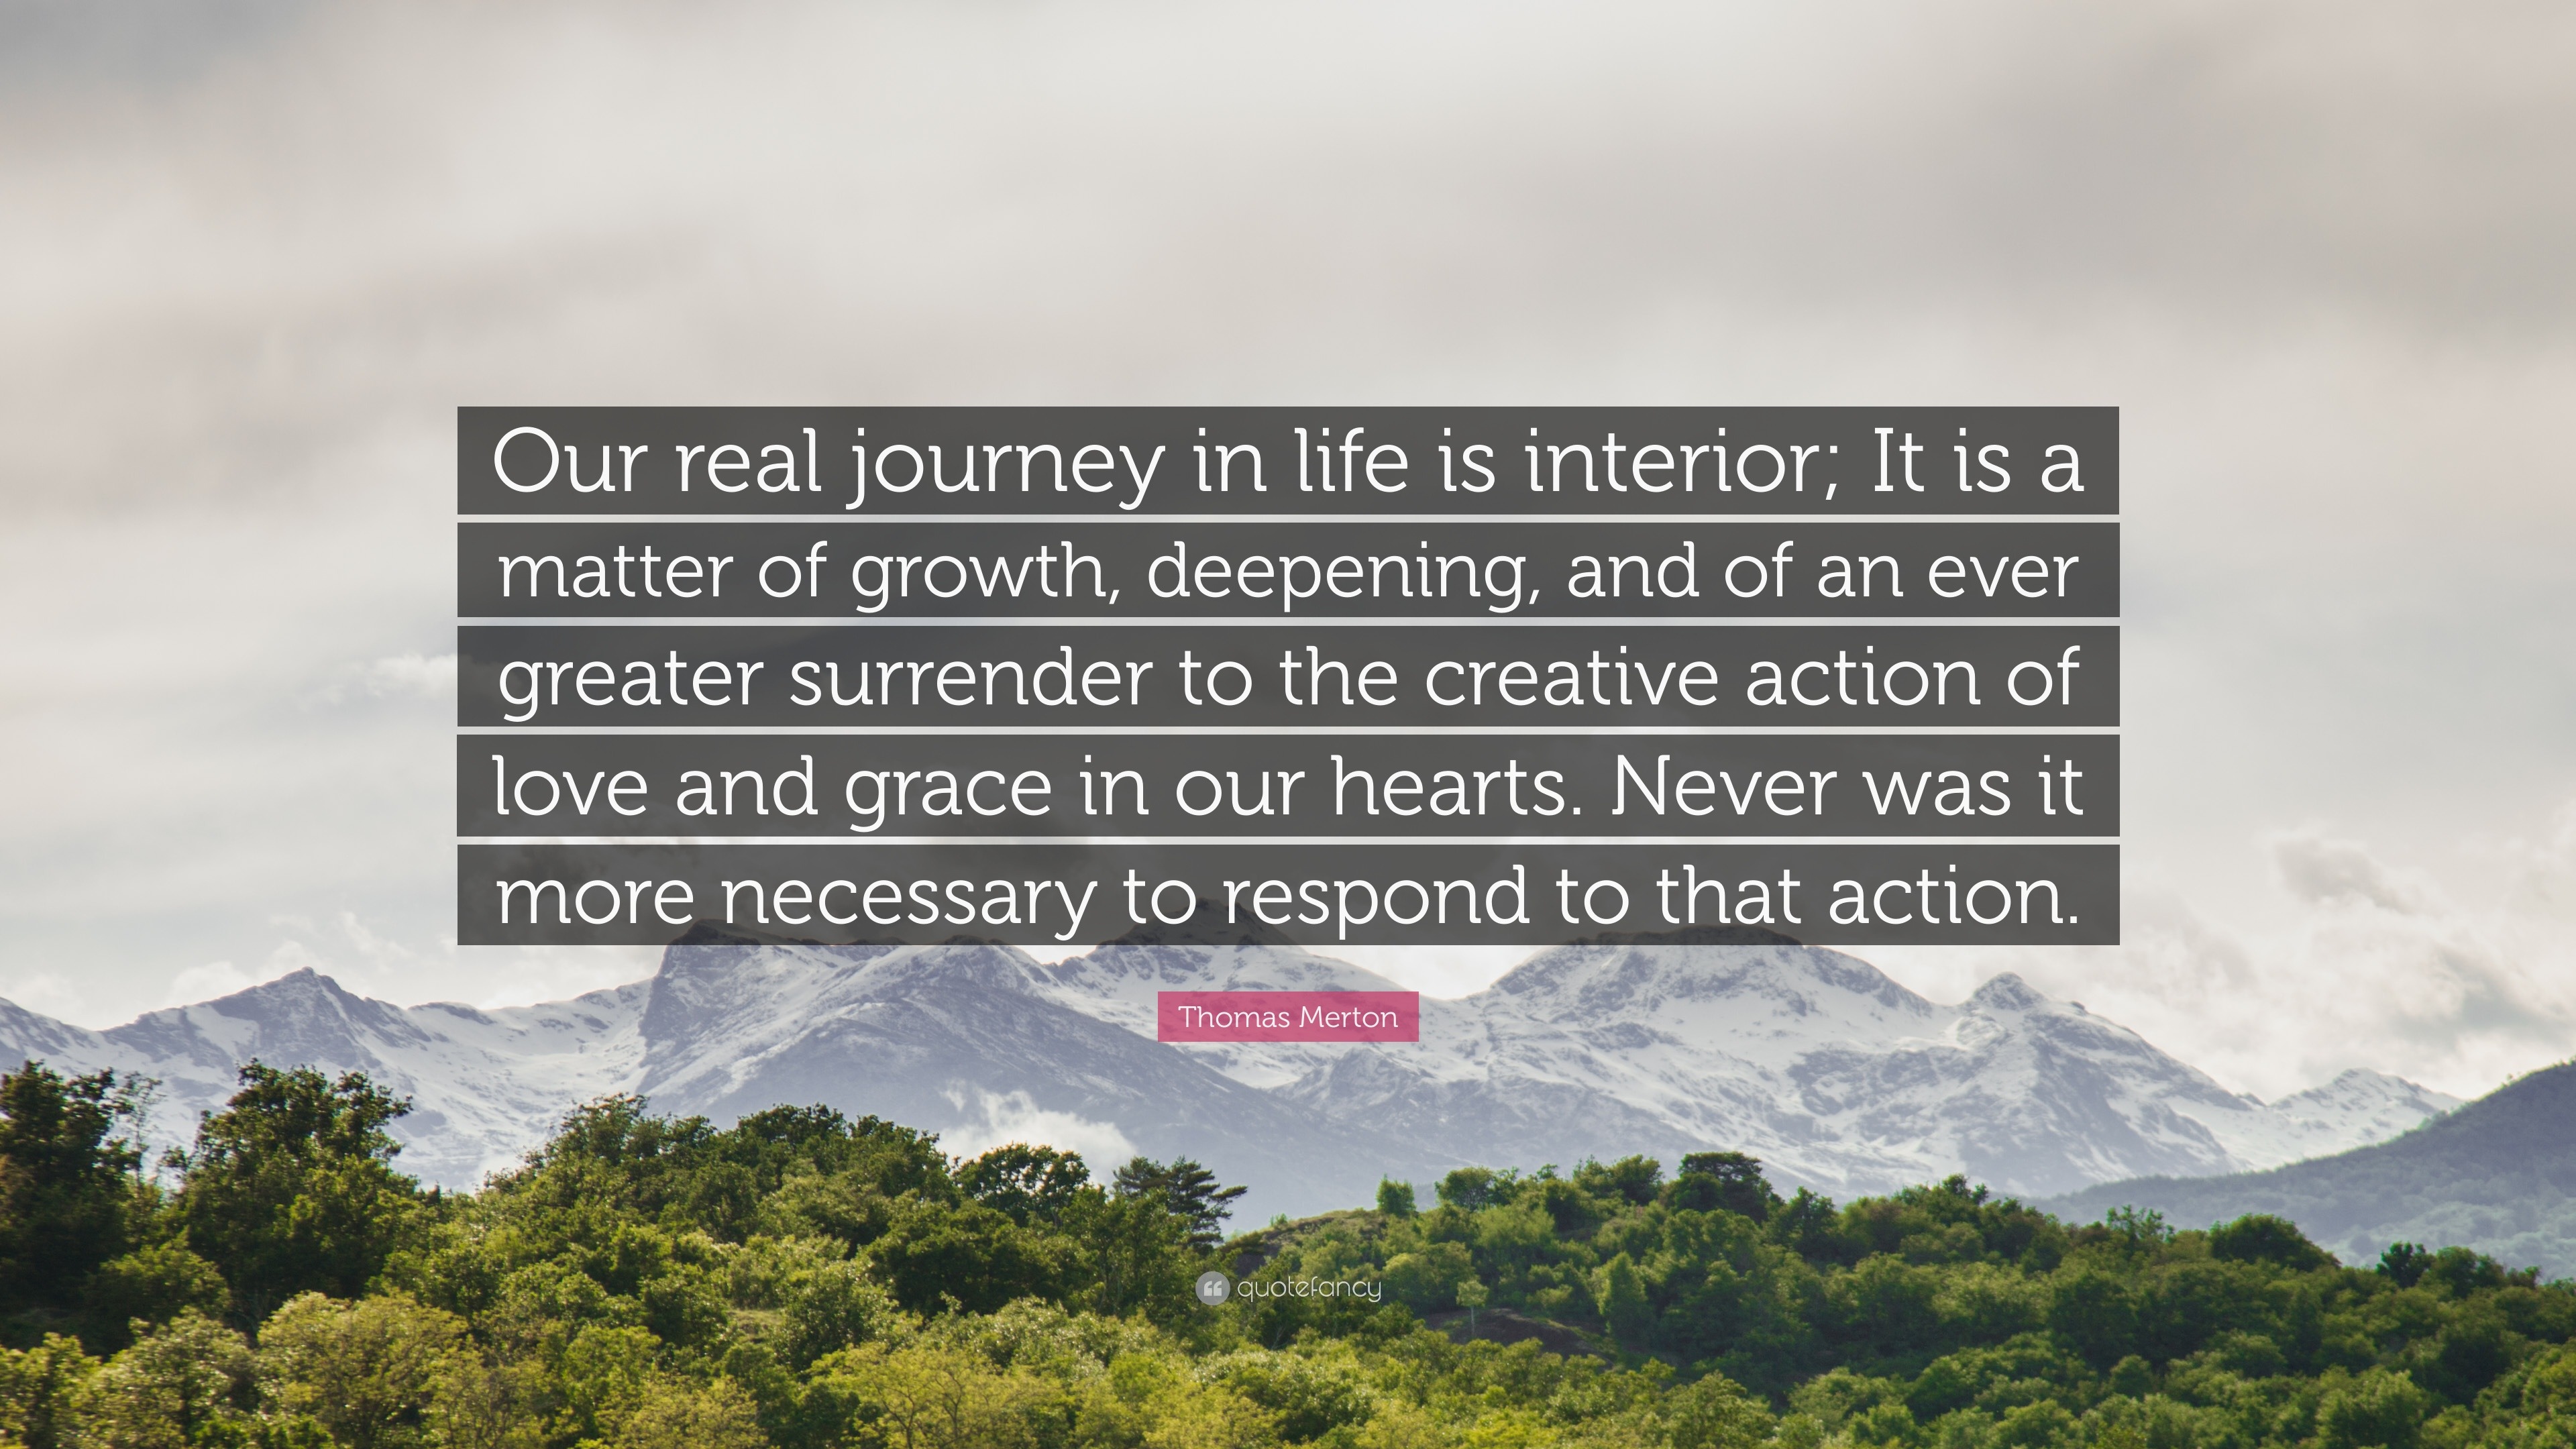 Thomas Merton Quote “Our real journey in life is interior It is a